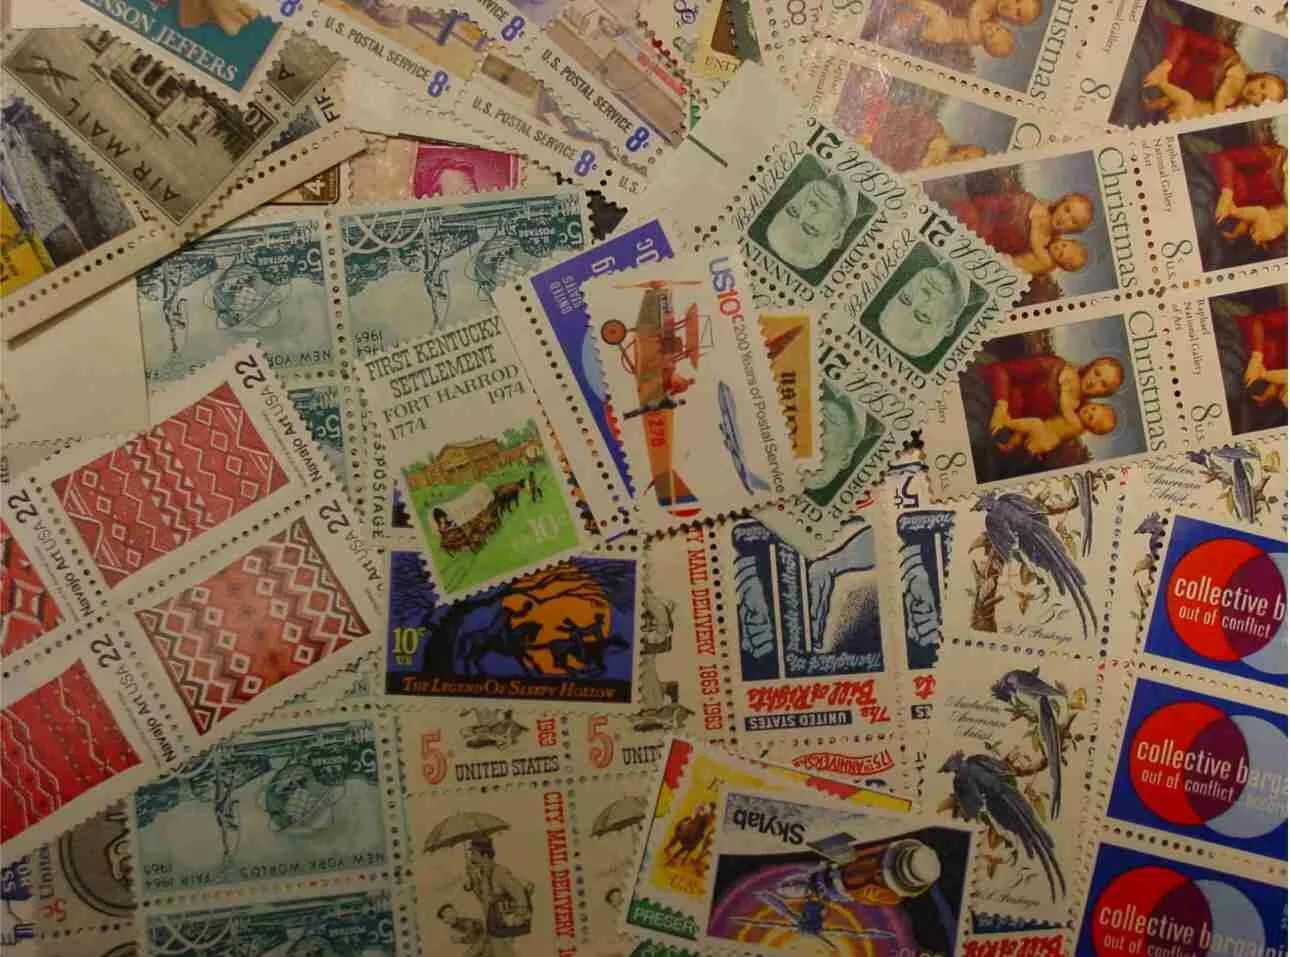 US Postage - A pile of stamps in the 5 cent to 22 cent range that are most valuable when used as postage. So brighten up your mail and save some money!